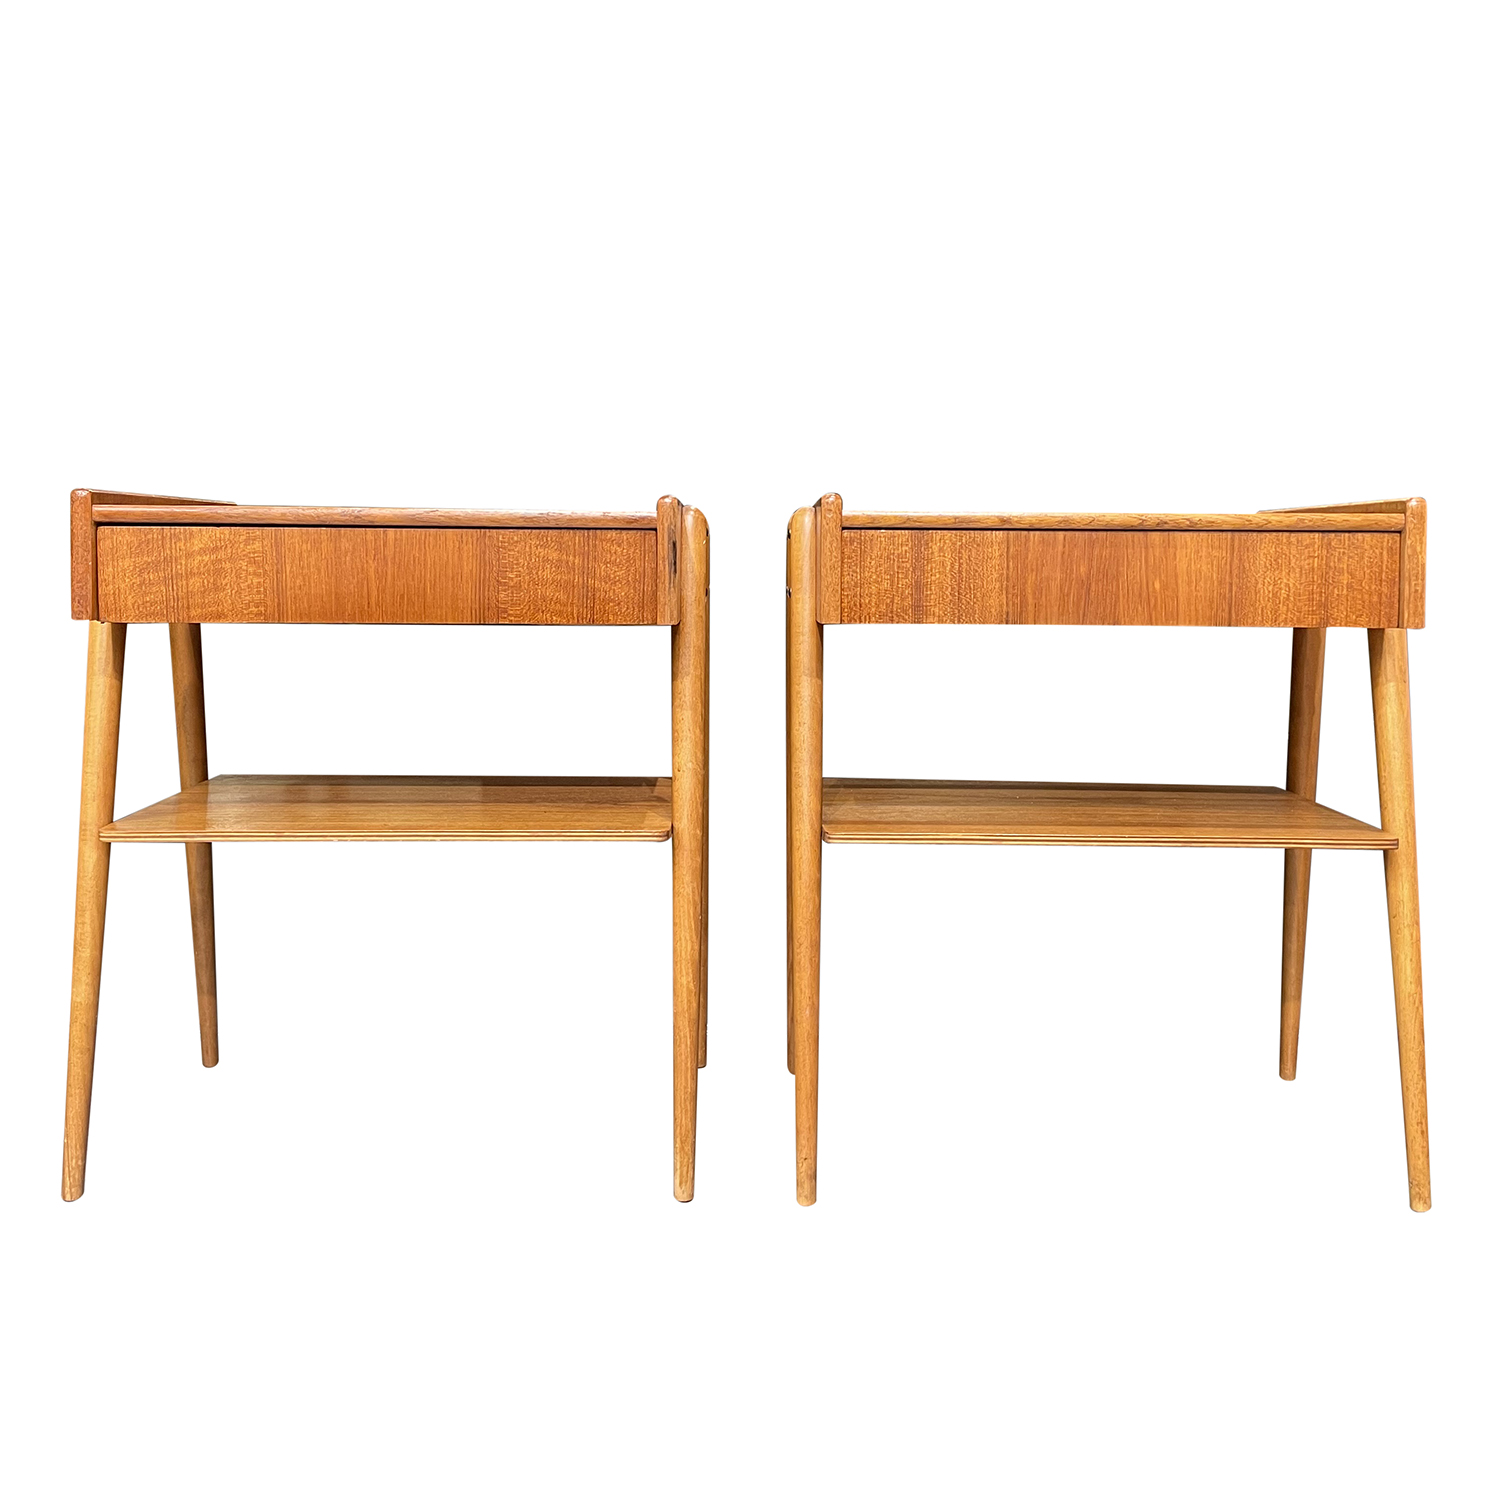 20th Century Danish Modern Pair of Beech Nightstands – Vintage Bed Side Tables